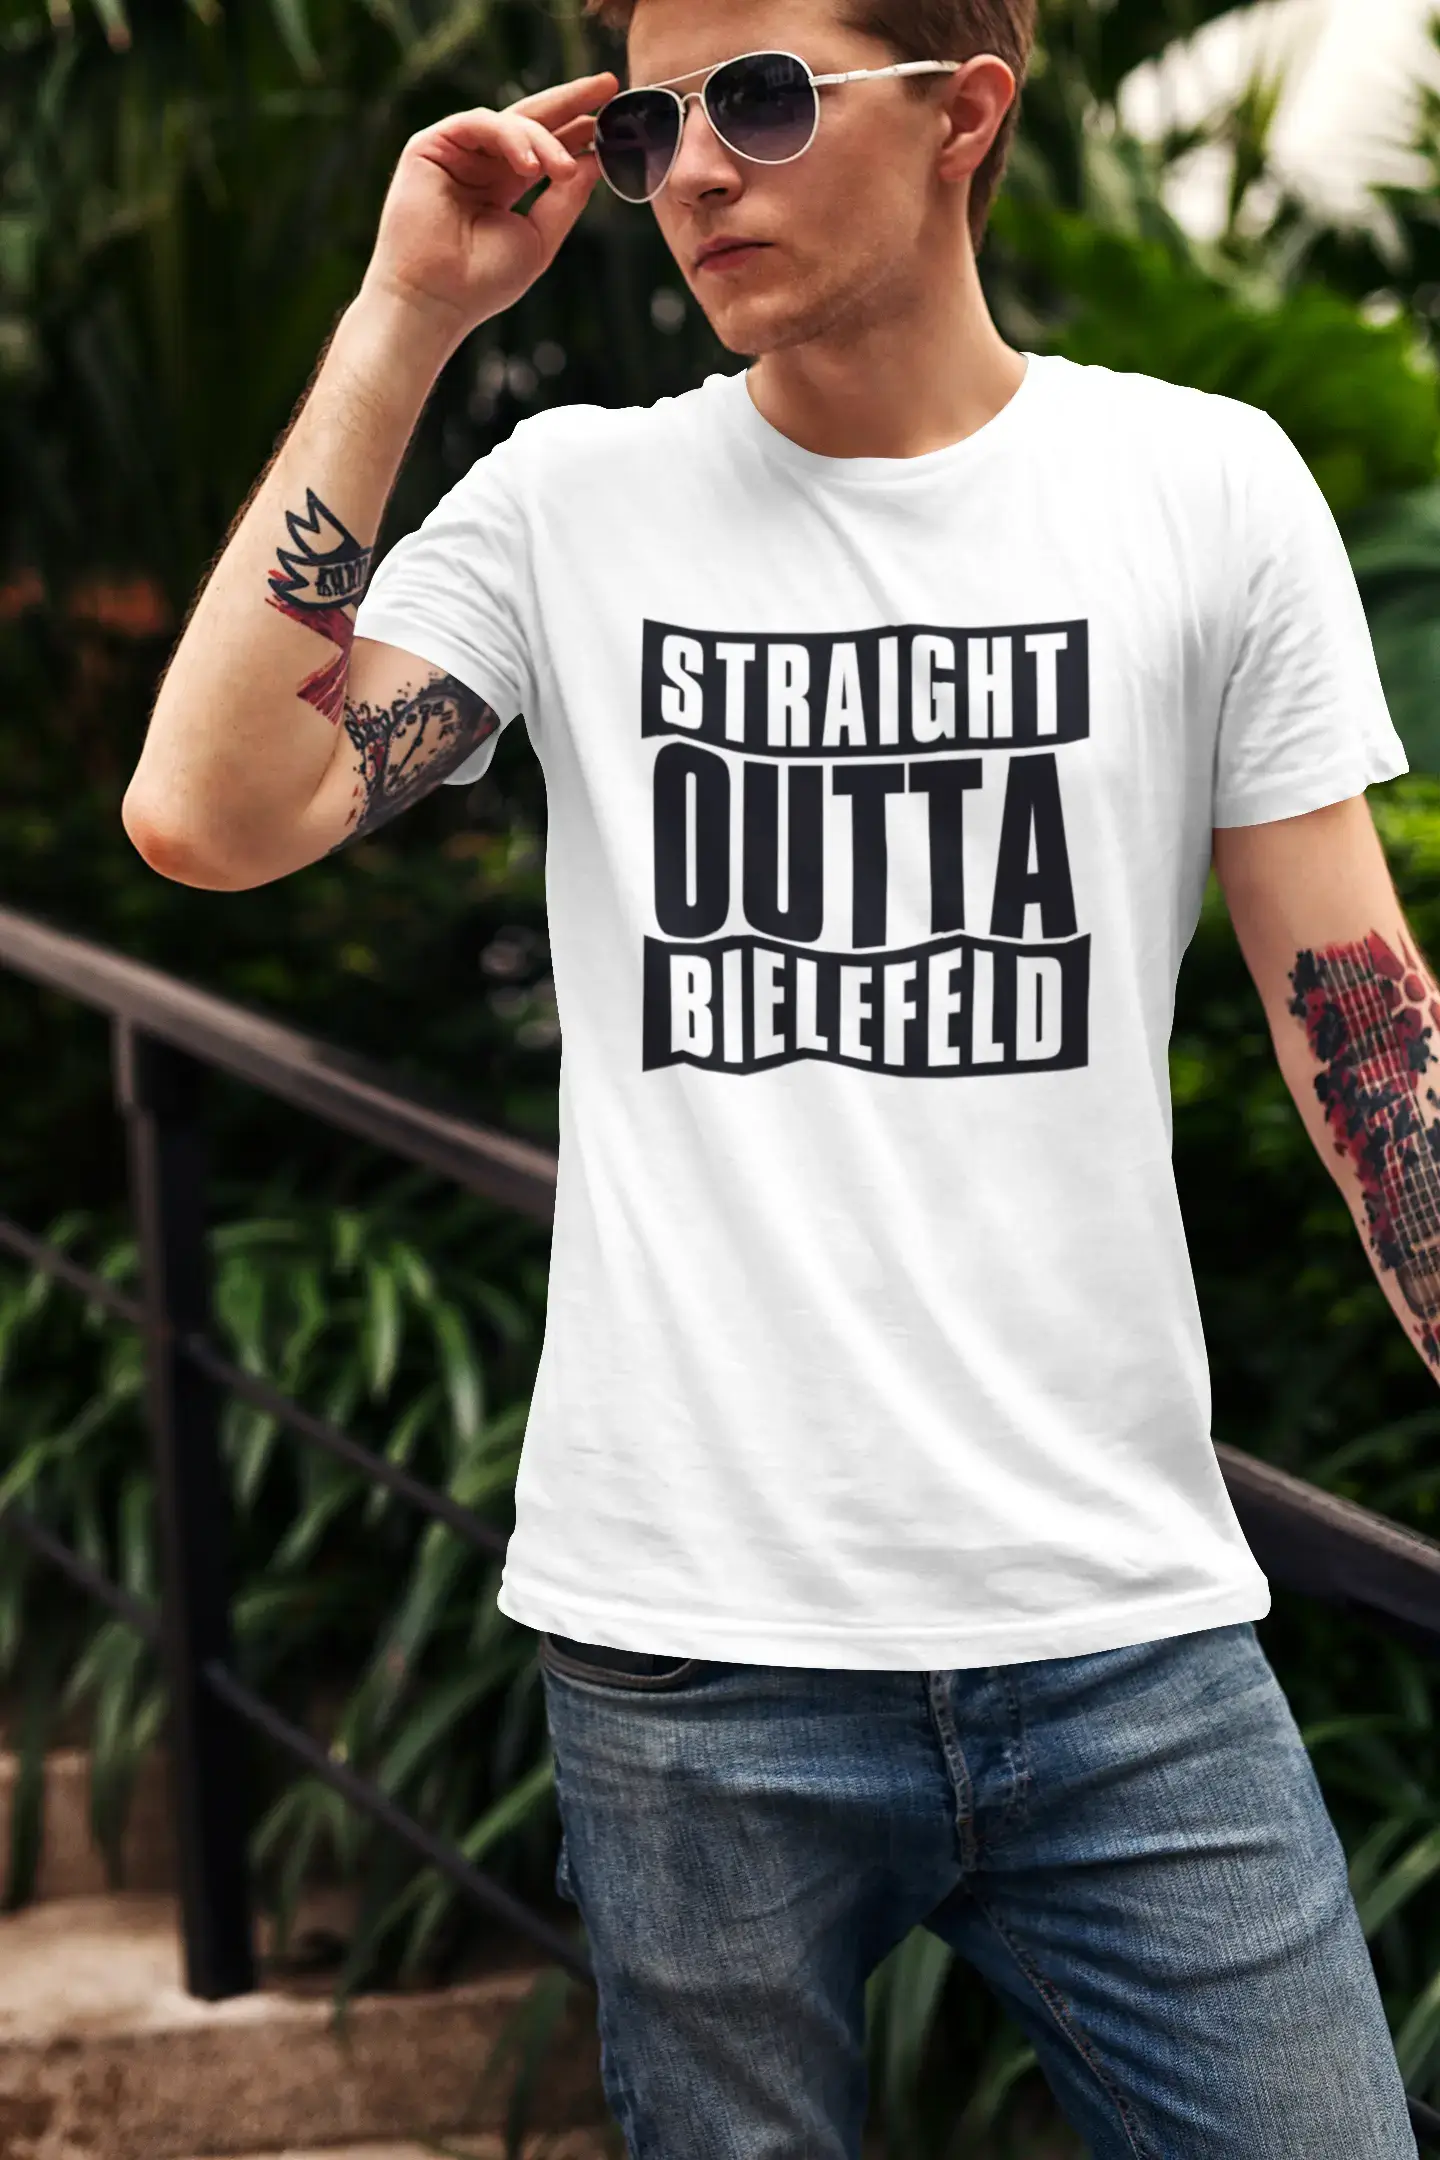 Straight Outta Bielefeld, Homme manches courtes Col rond 00027